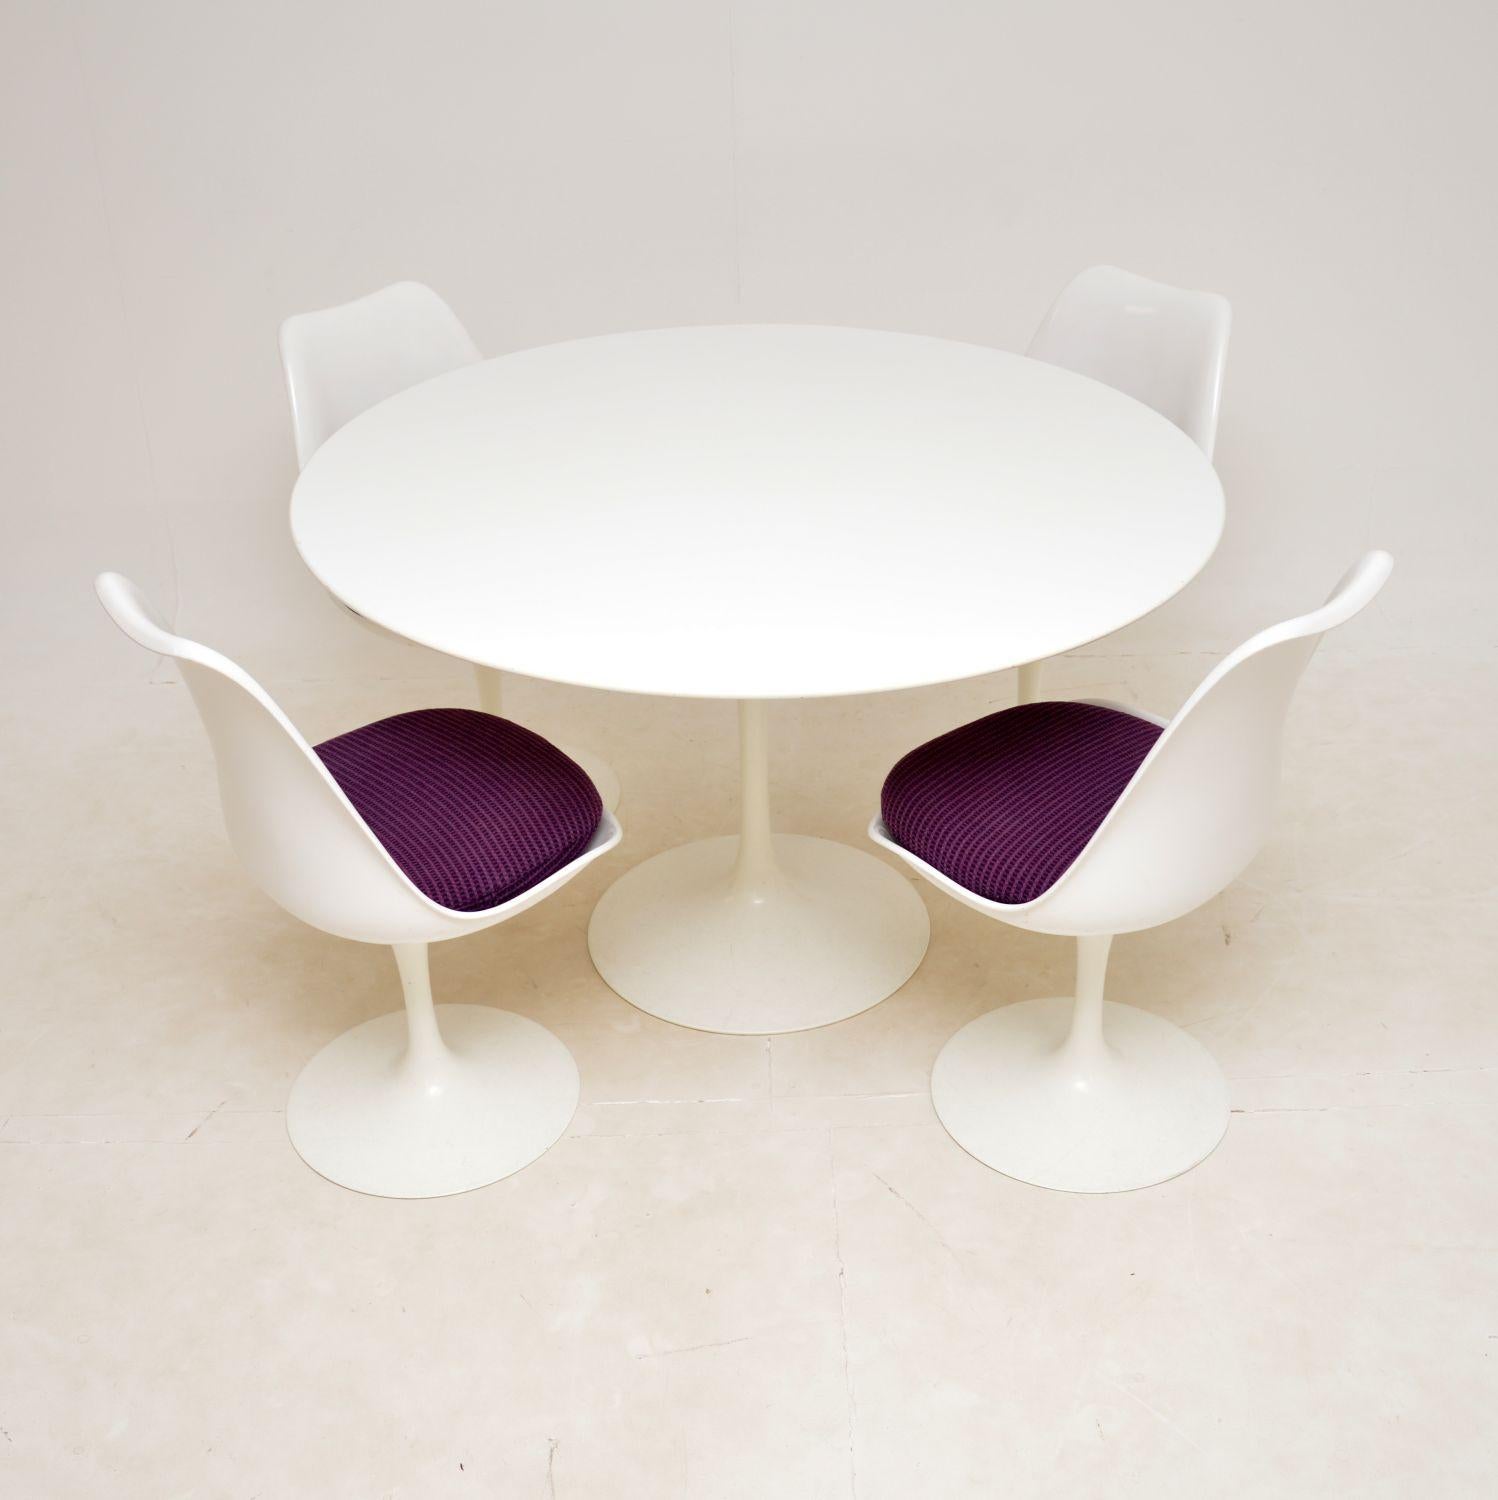 A stylish and iconic design, this tulip dining table and four matching swivel dining chairs were designed by Eero Saarinen for Knoll in the 1950’s.

This example is from the 50th anniversary edition, made by Knoll and dating from the early 2000’s.